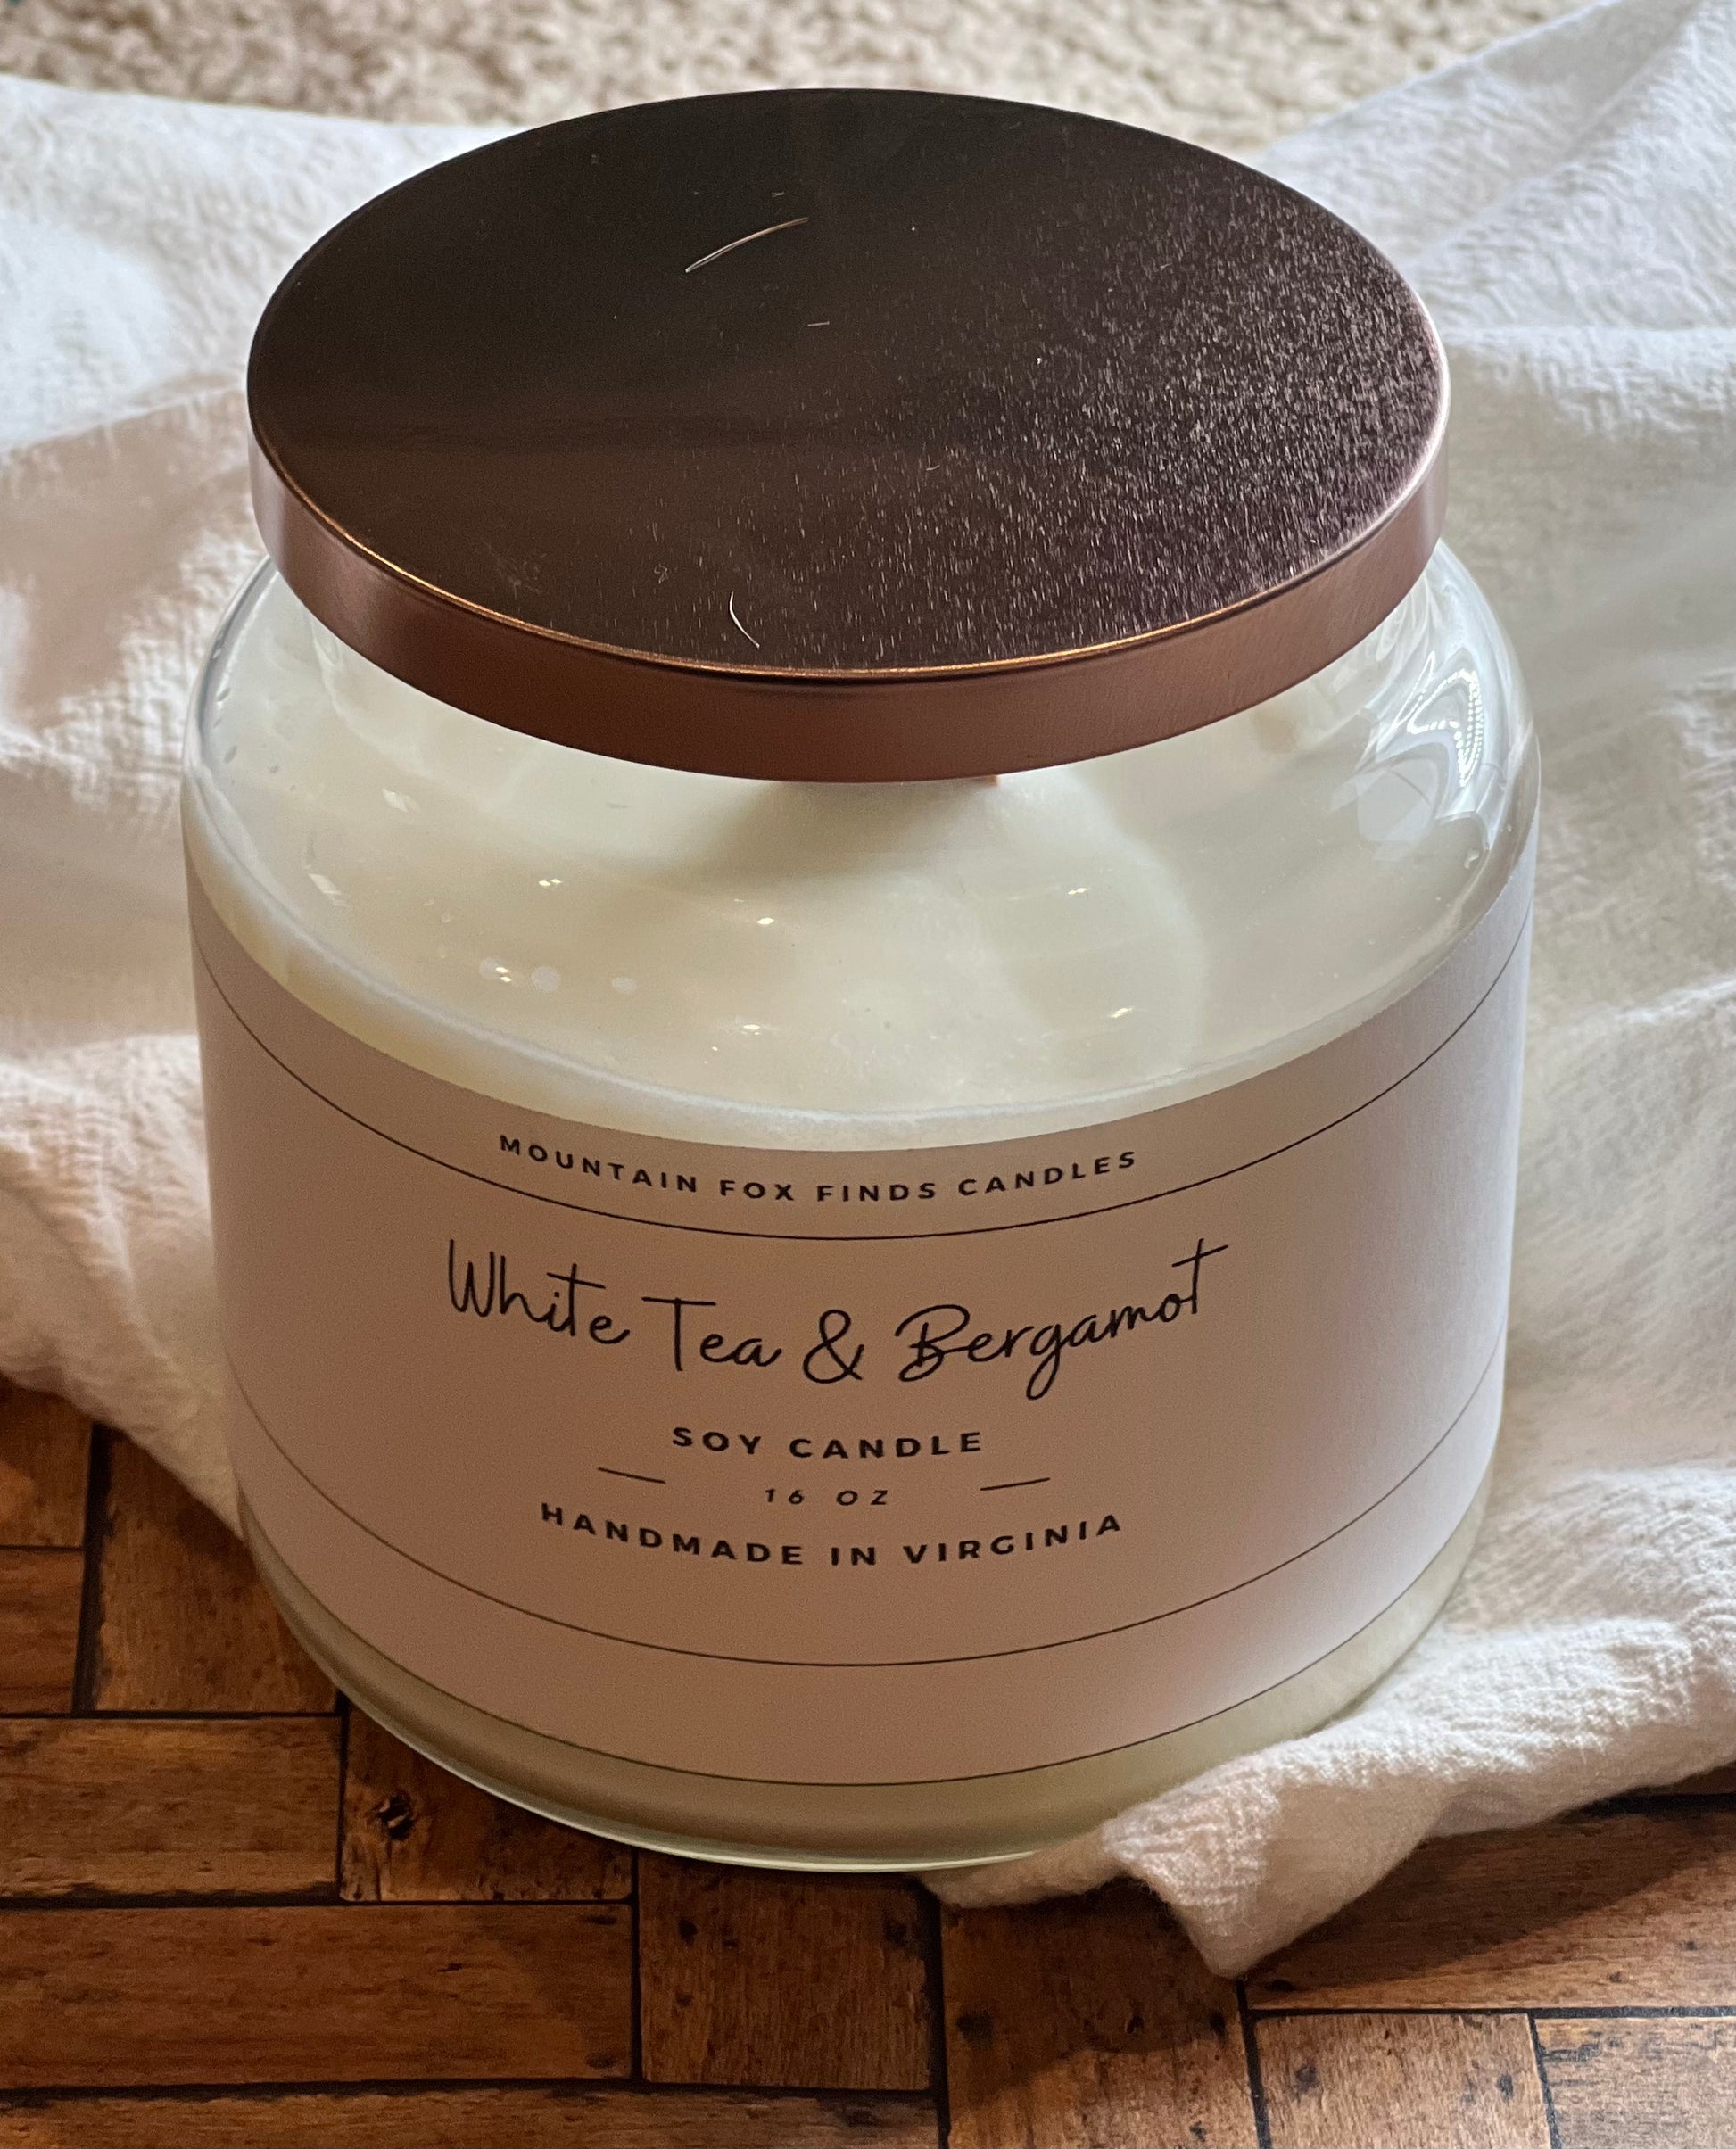 White Tea and Bergamot Apothecary Jar Soy Wax Candle Front Side